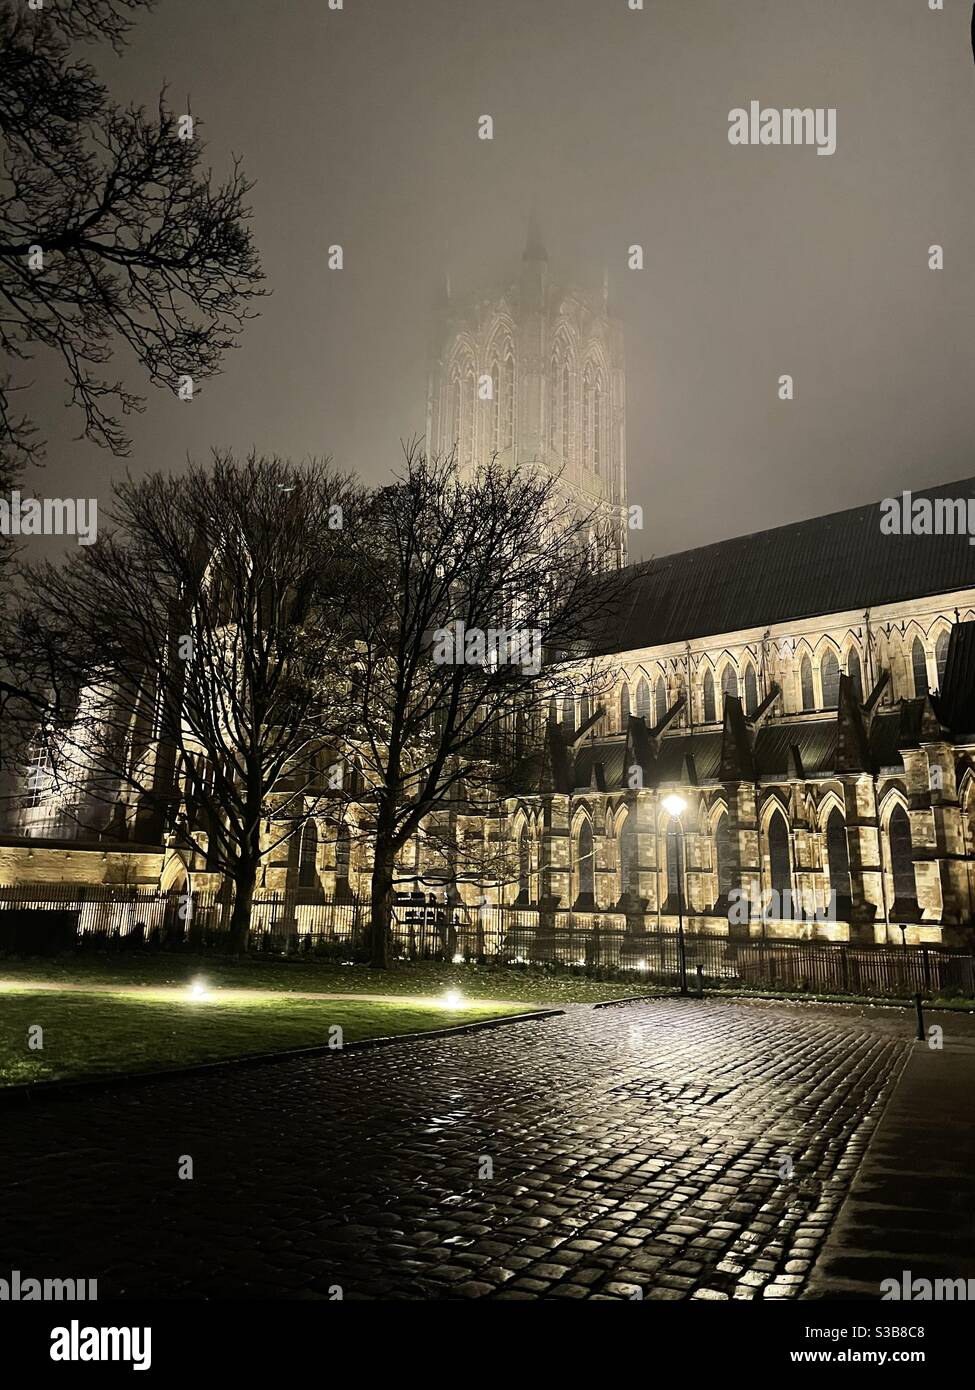 Lincoln Cathedral Stock Photo